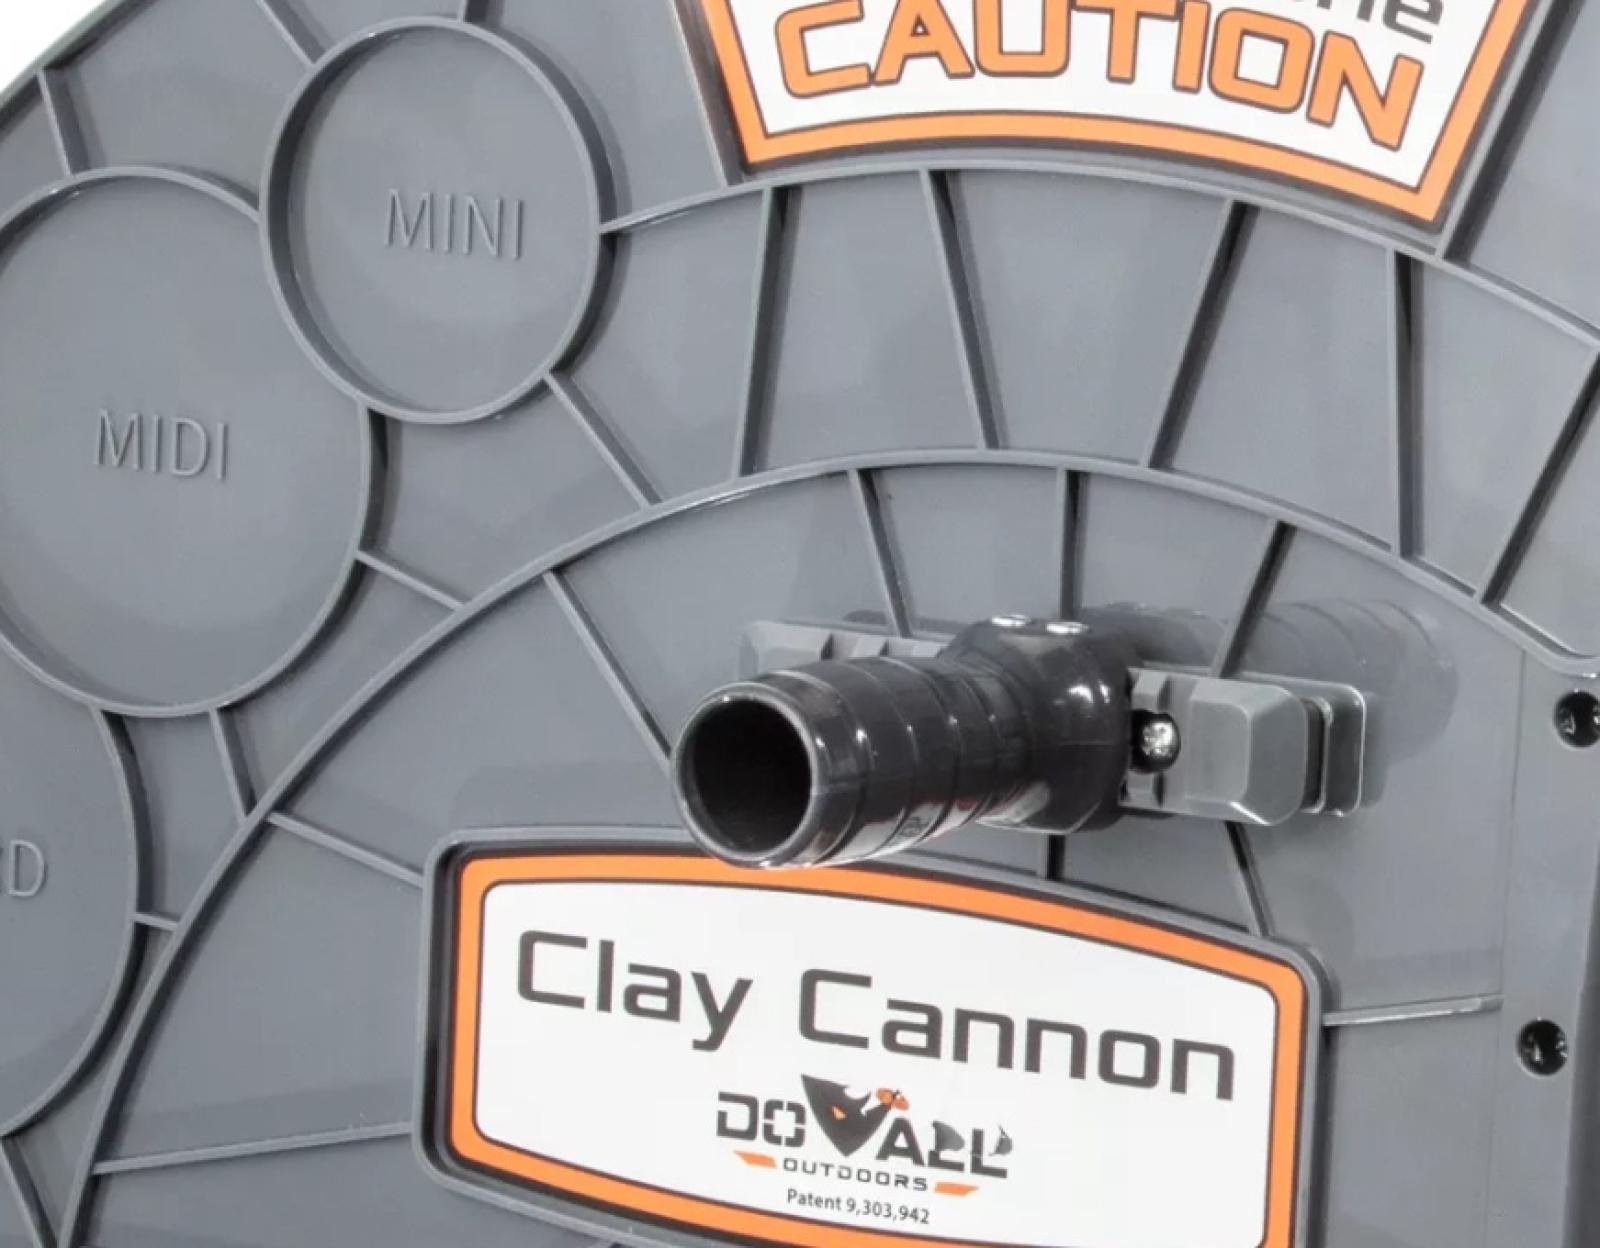 Do All Outdoors Clay Cannon